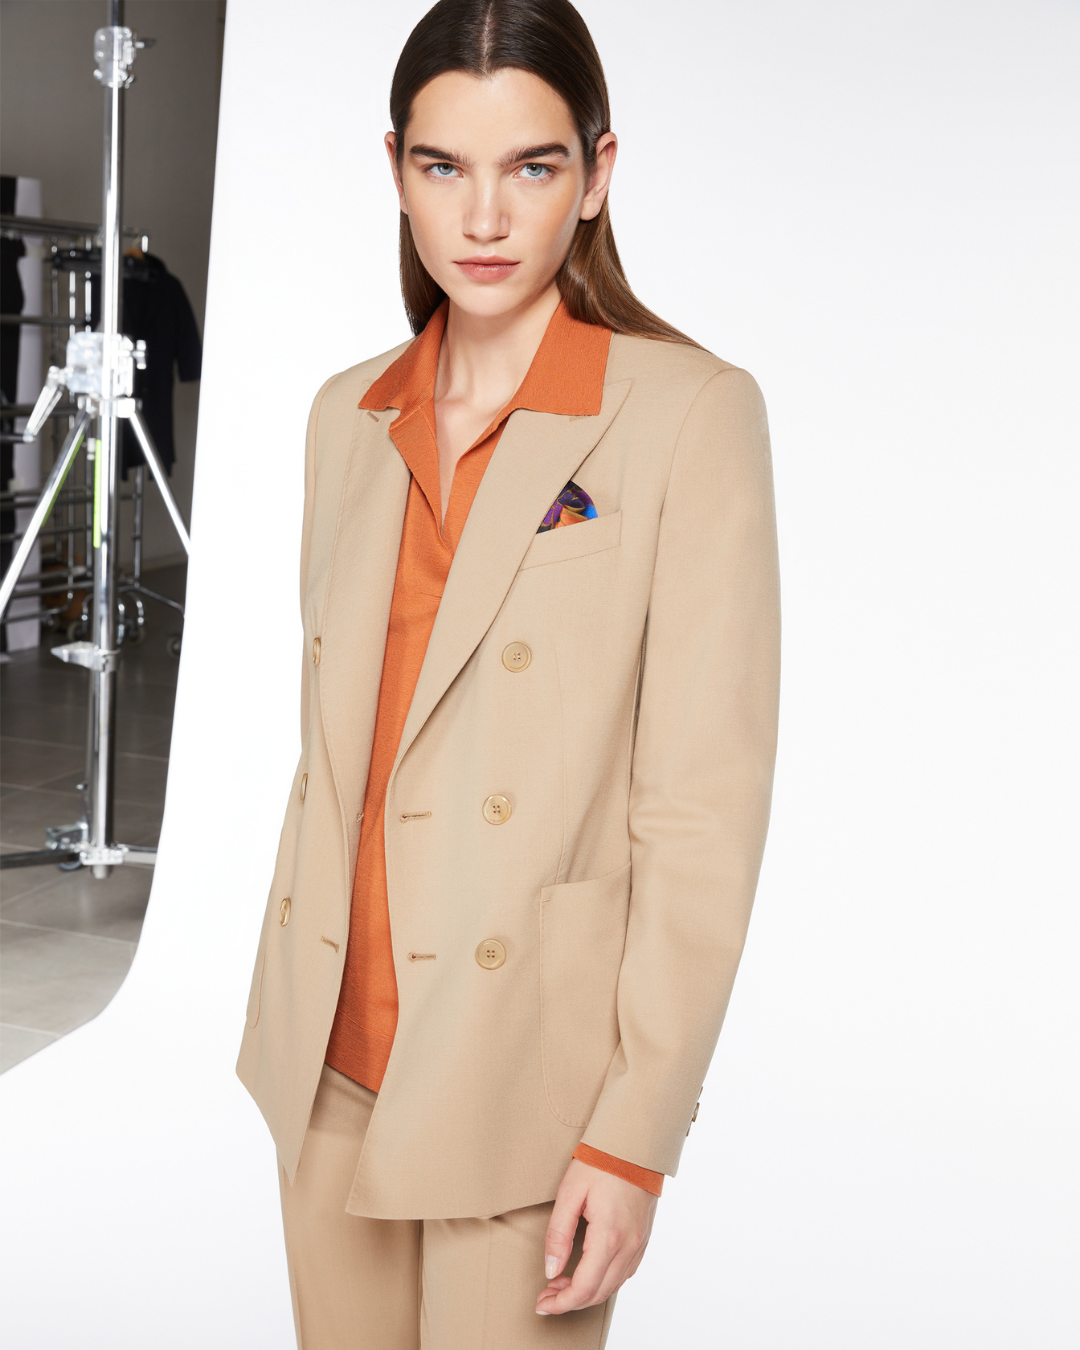 , Max Mara Spring Summer 2023 Tailored Suit Project